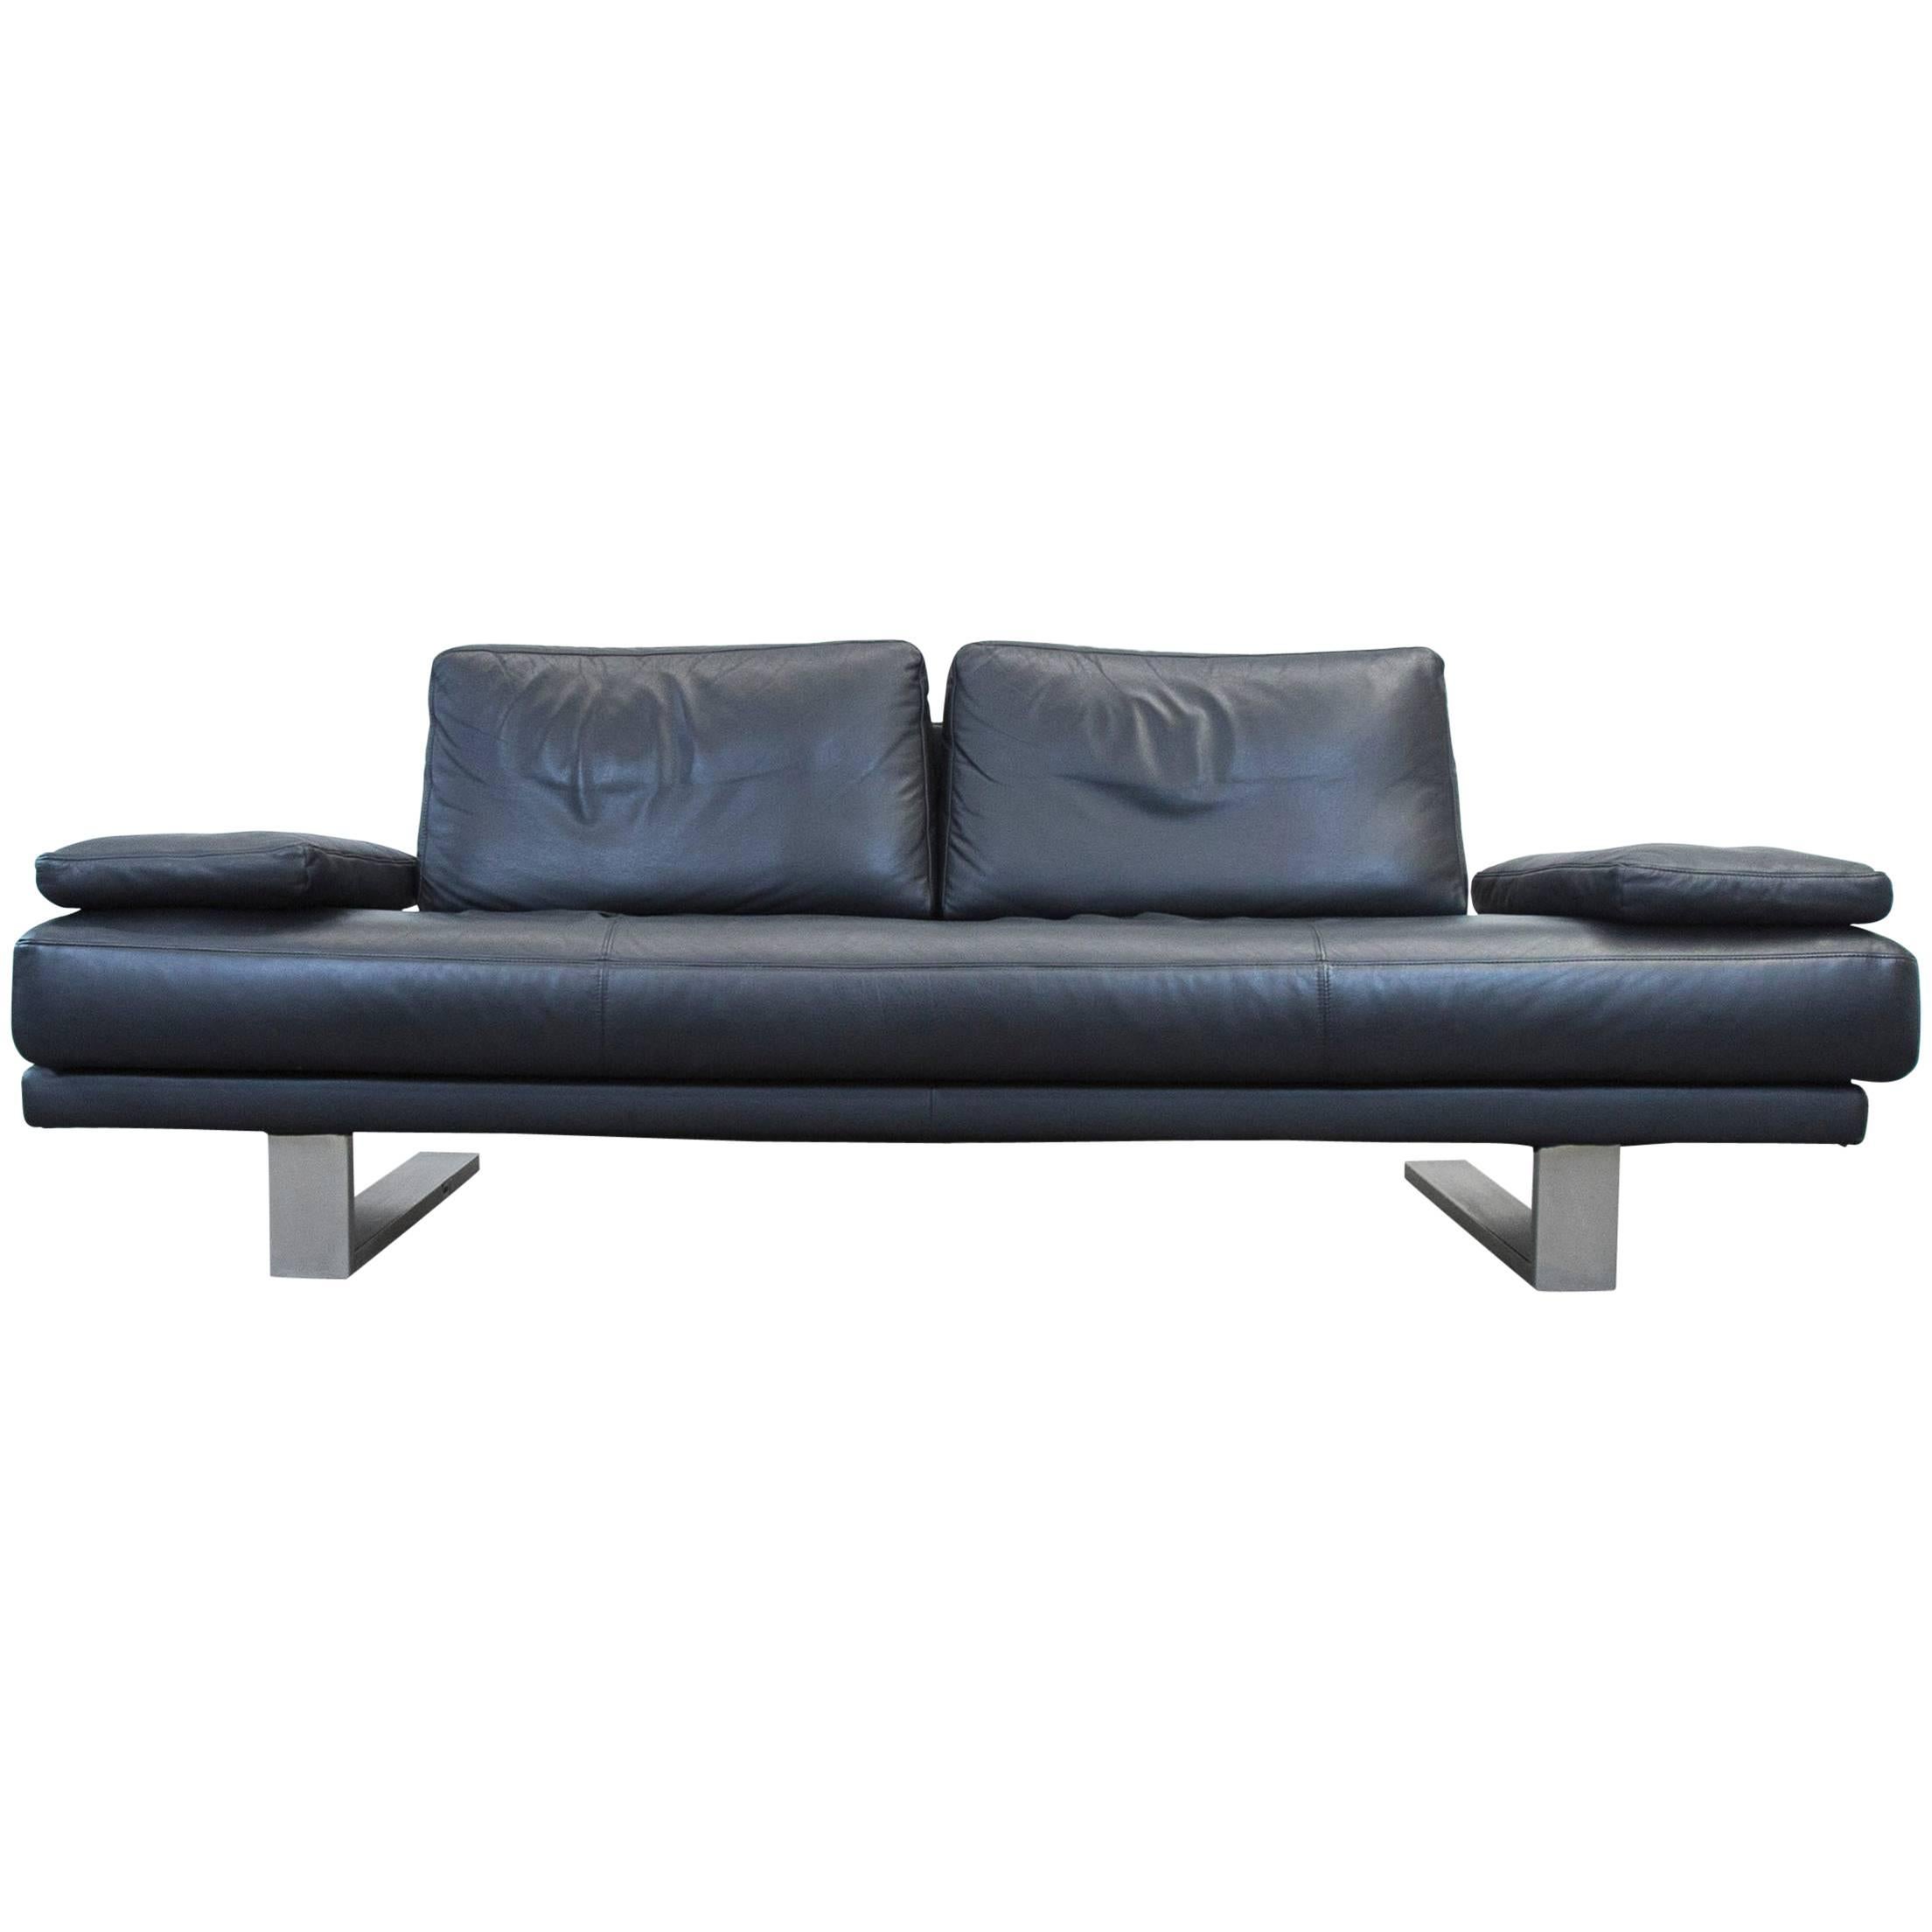 Rolf Benz Sob 6600 Designer Leather Sofa Black Three-Seat Couch Modern For Sale